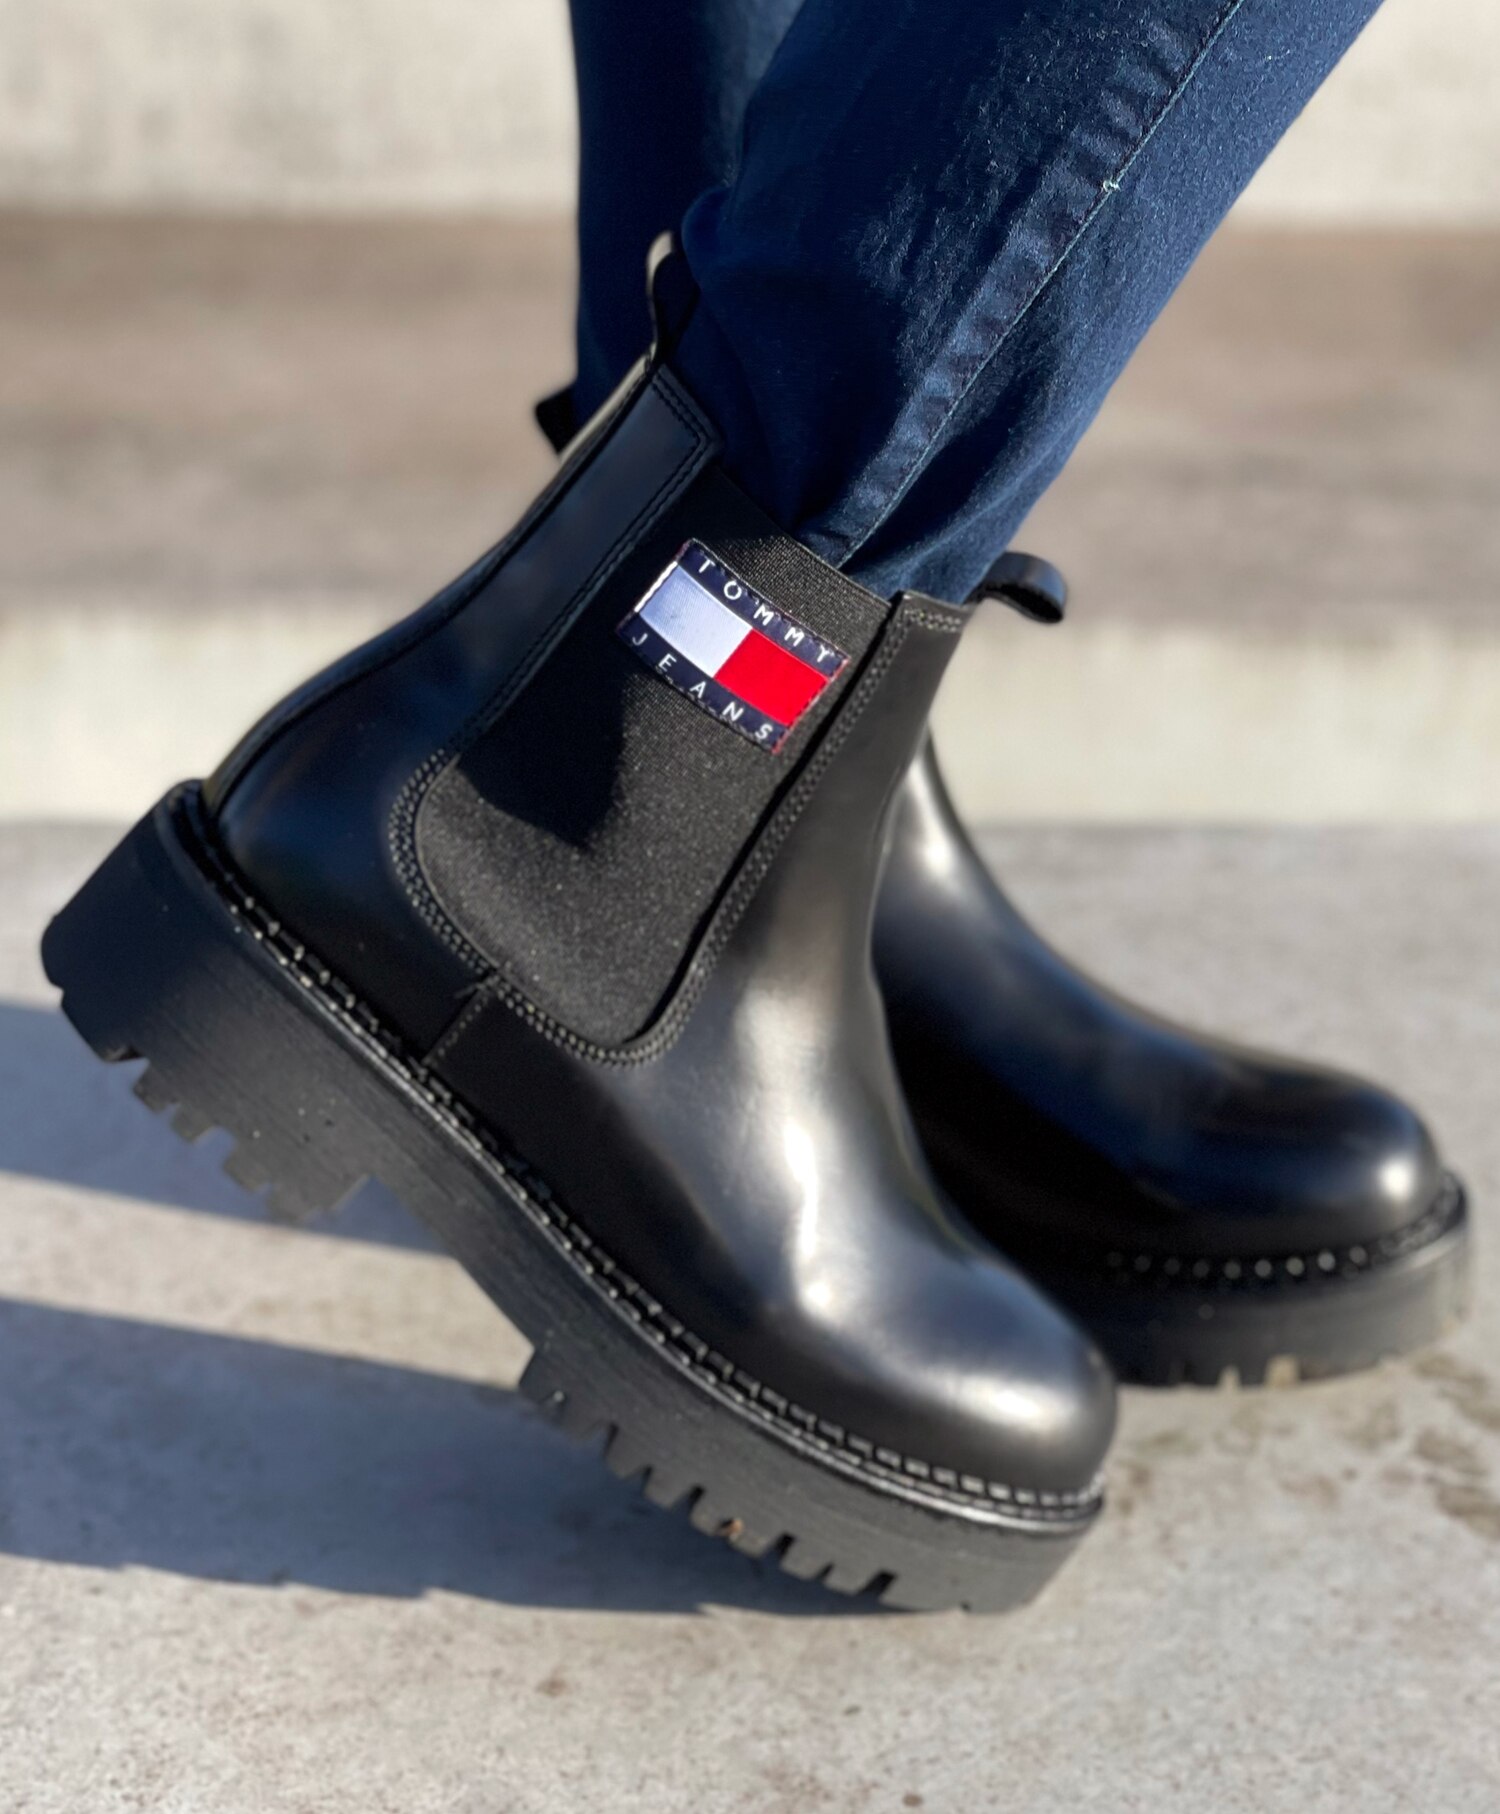 Tommy Hilfiger Chelsea Boot